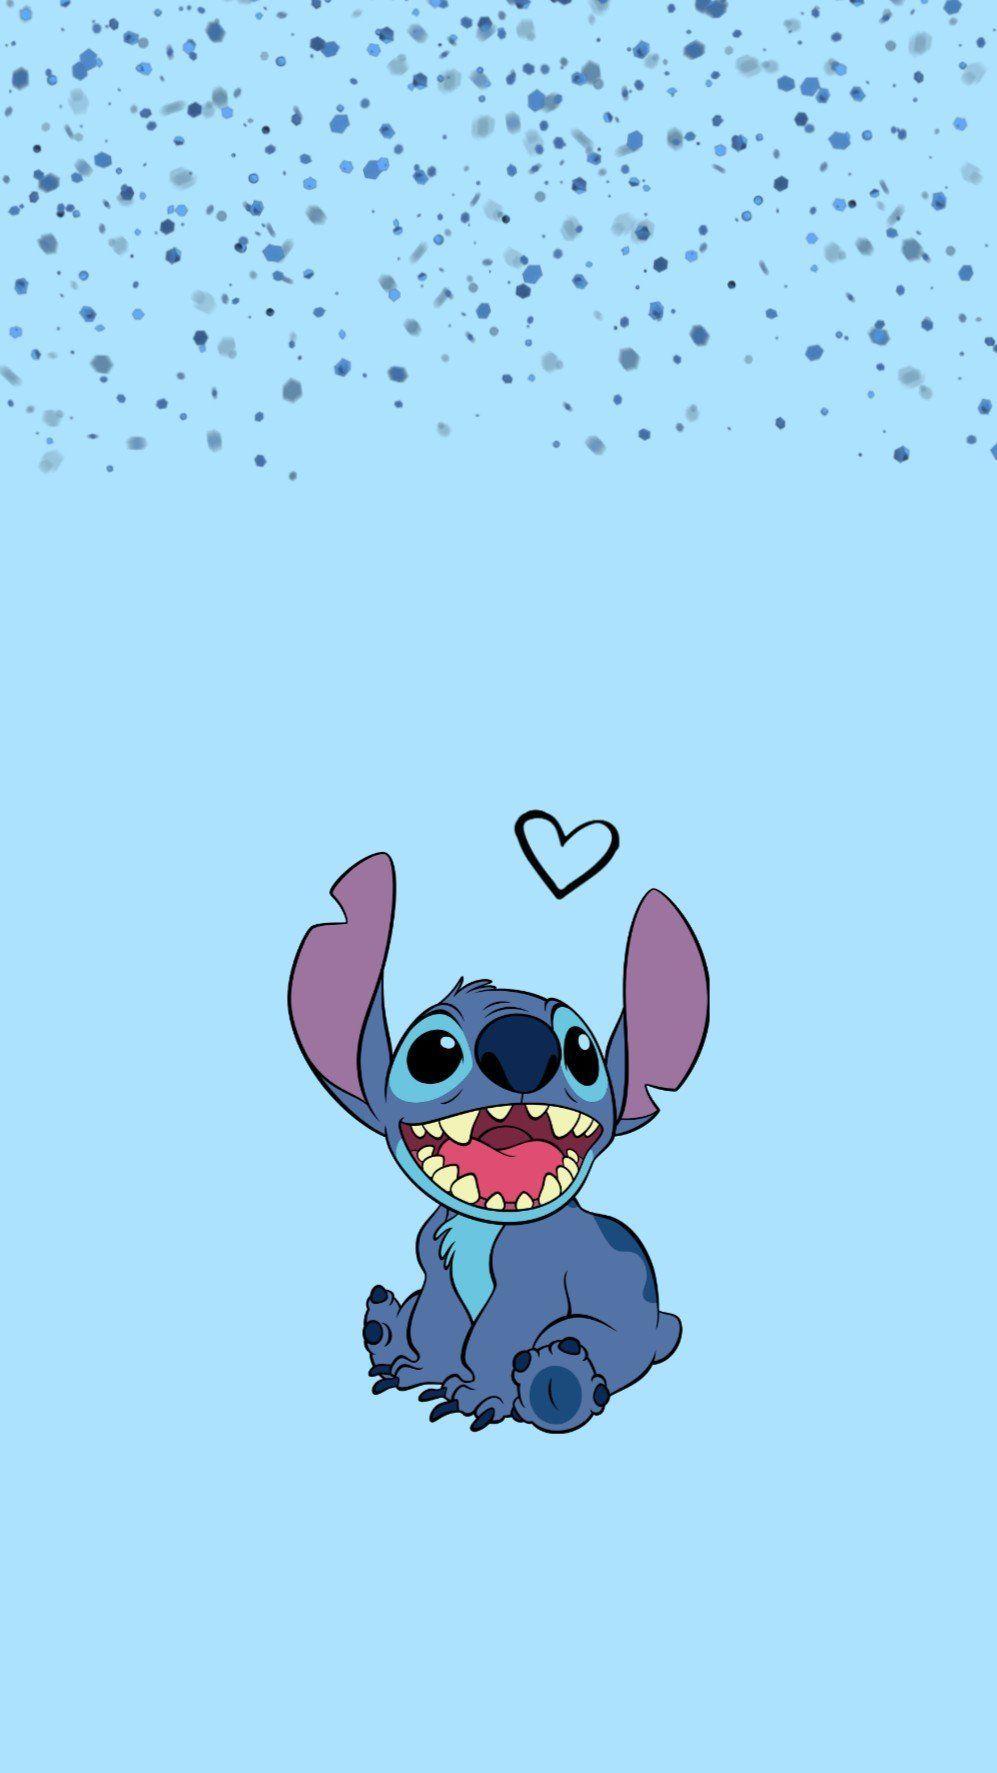 Cute Aesthetic Stitch Wallpapers - Top Free Cute Aesthetic Stitch 